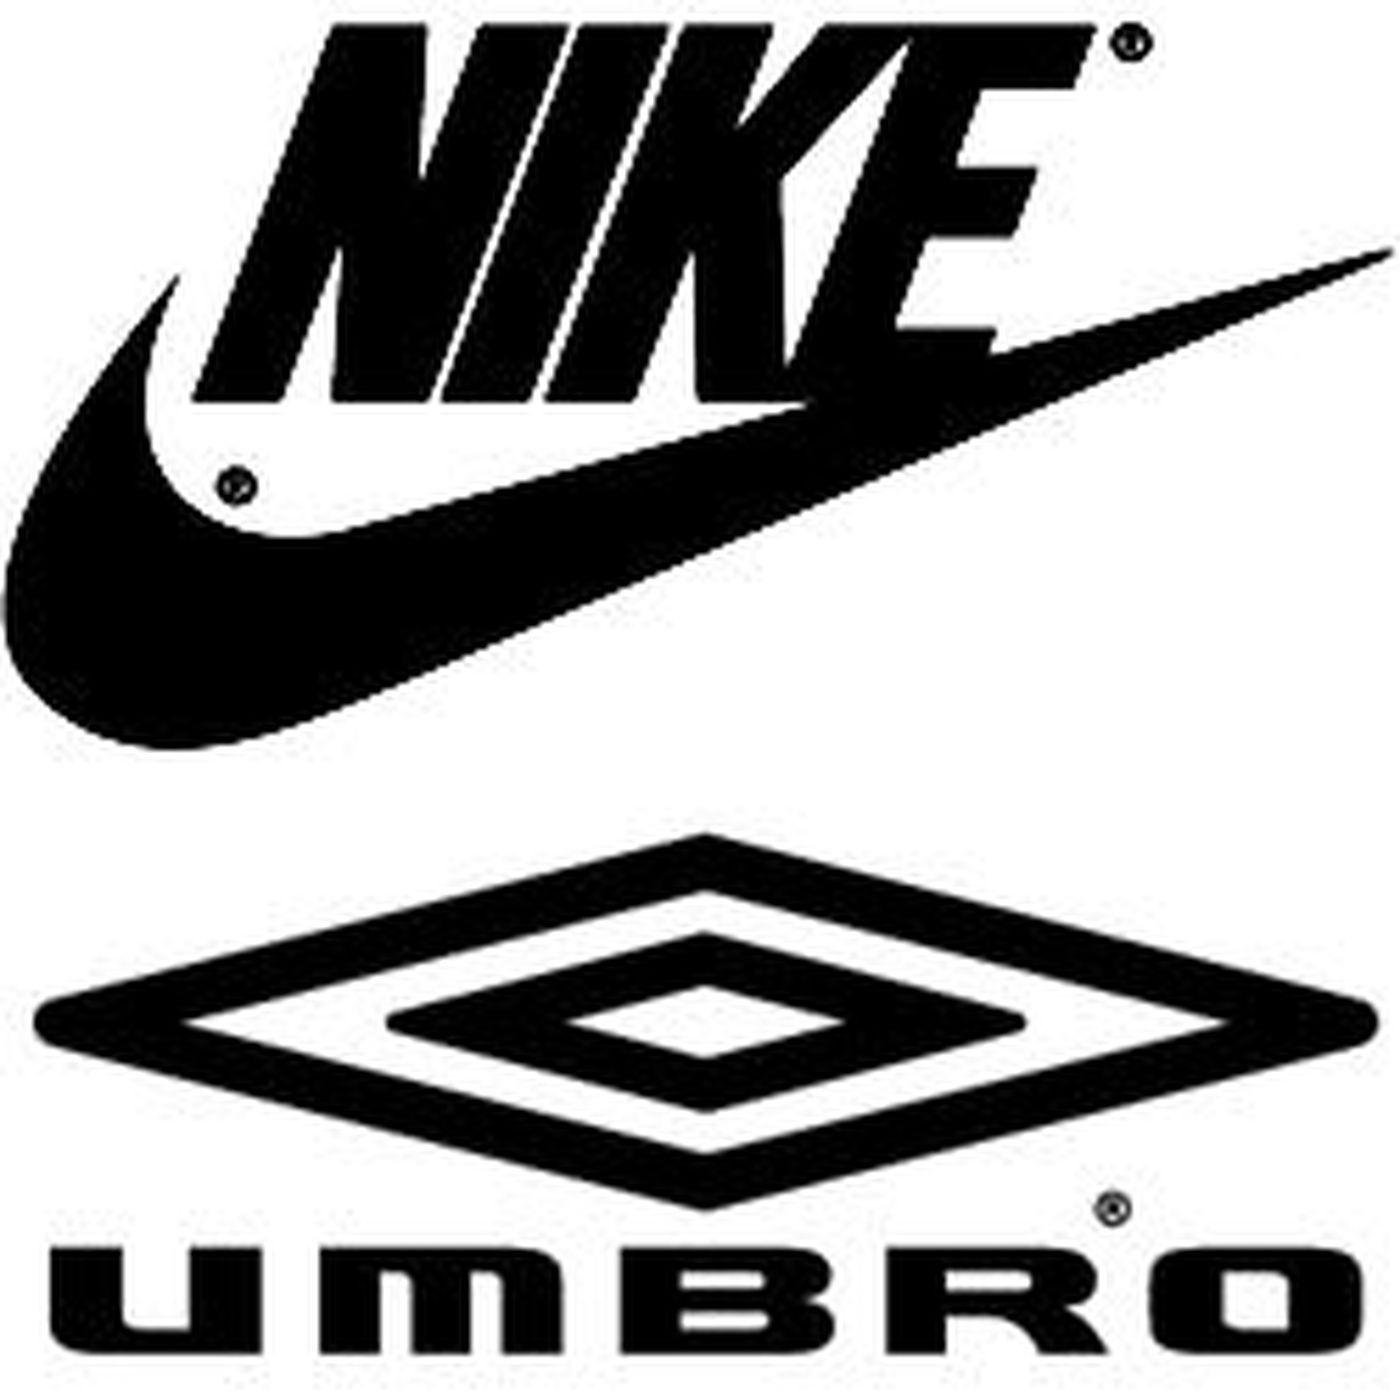 Umbro International Logo - Nike to Acquire British Soccer Supplier Umbro in Attempt to Broaden ...